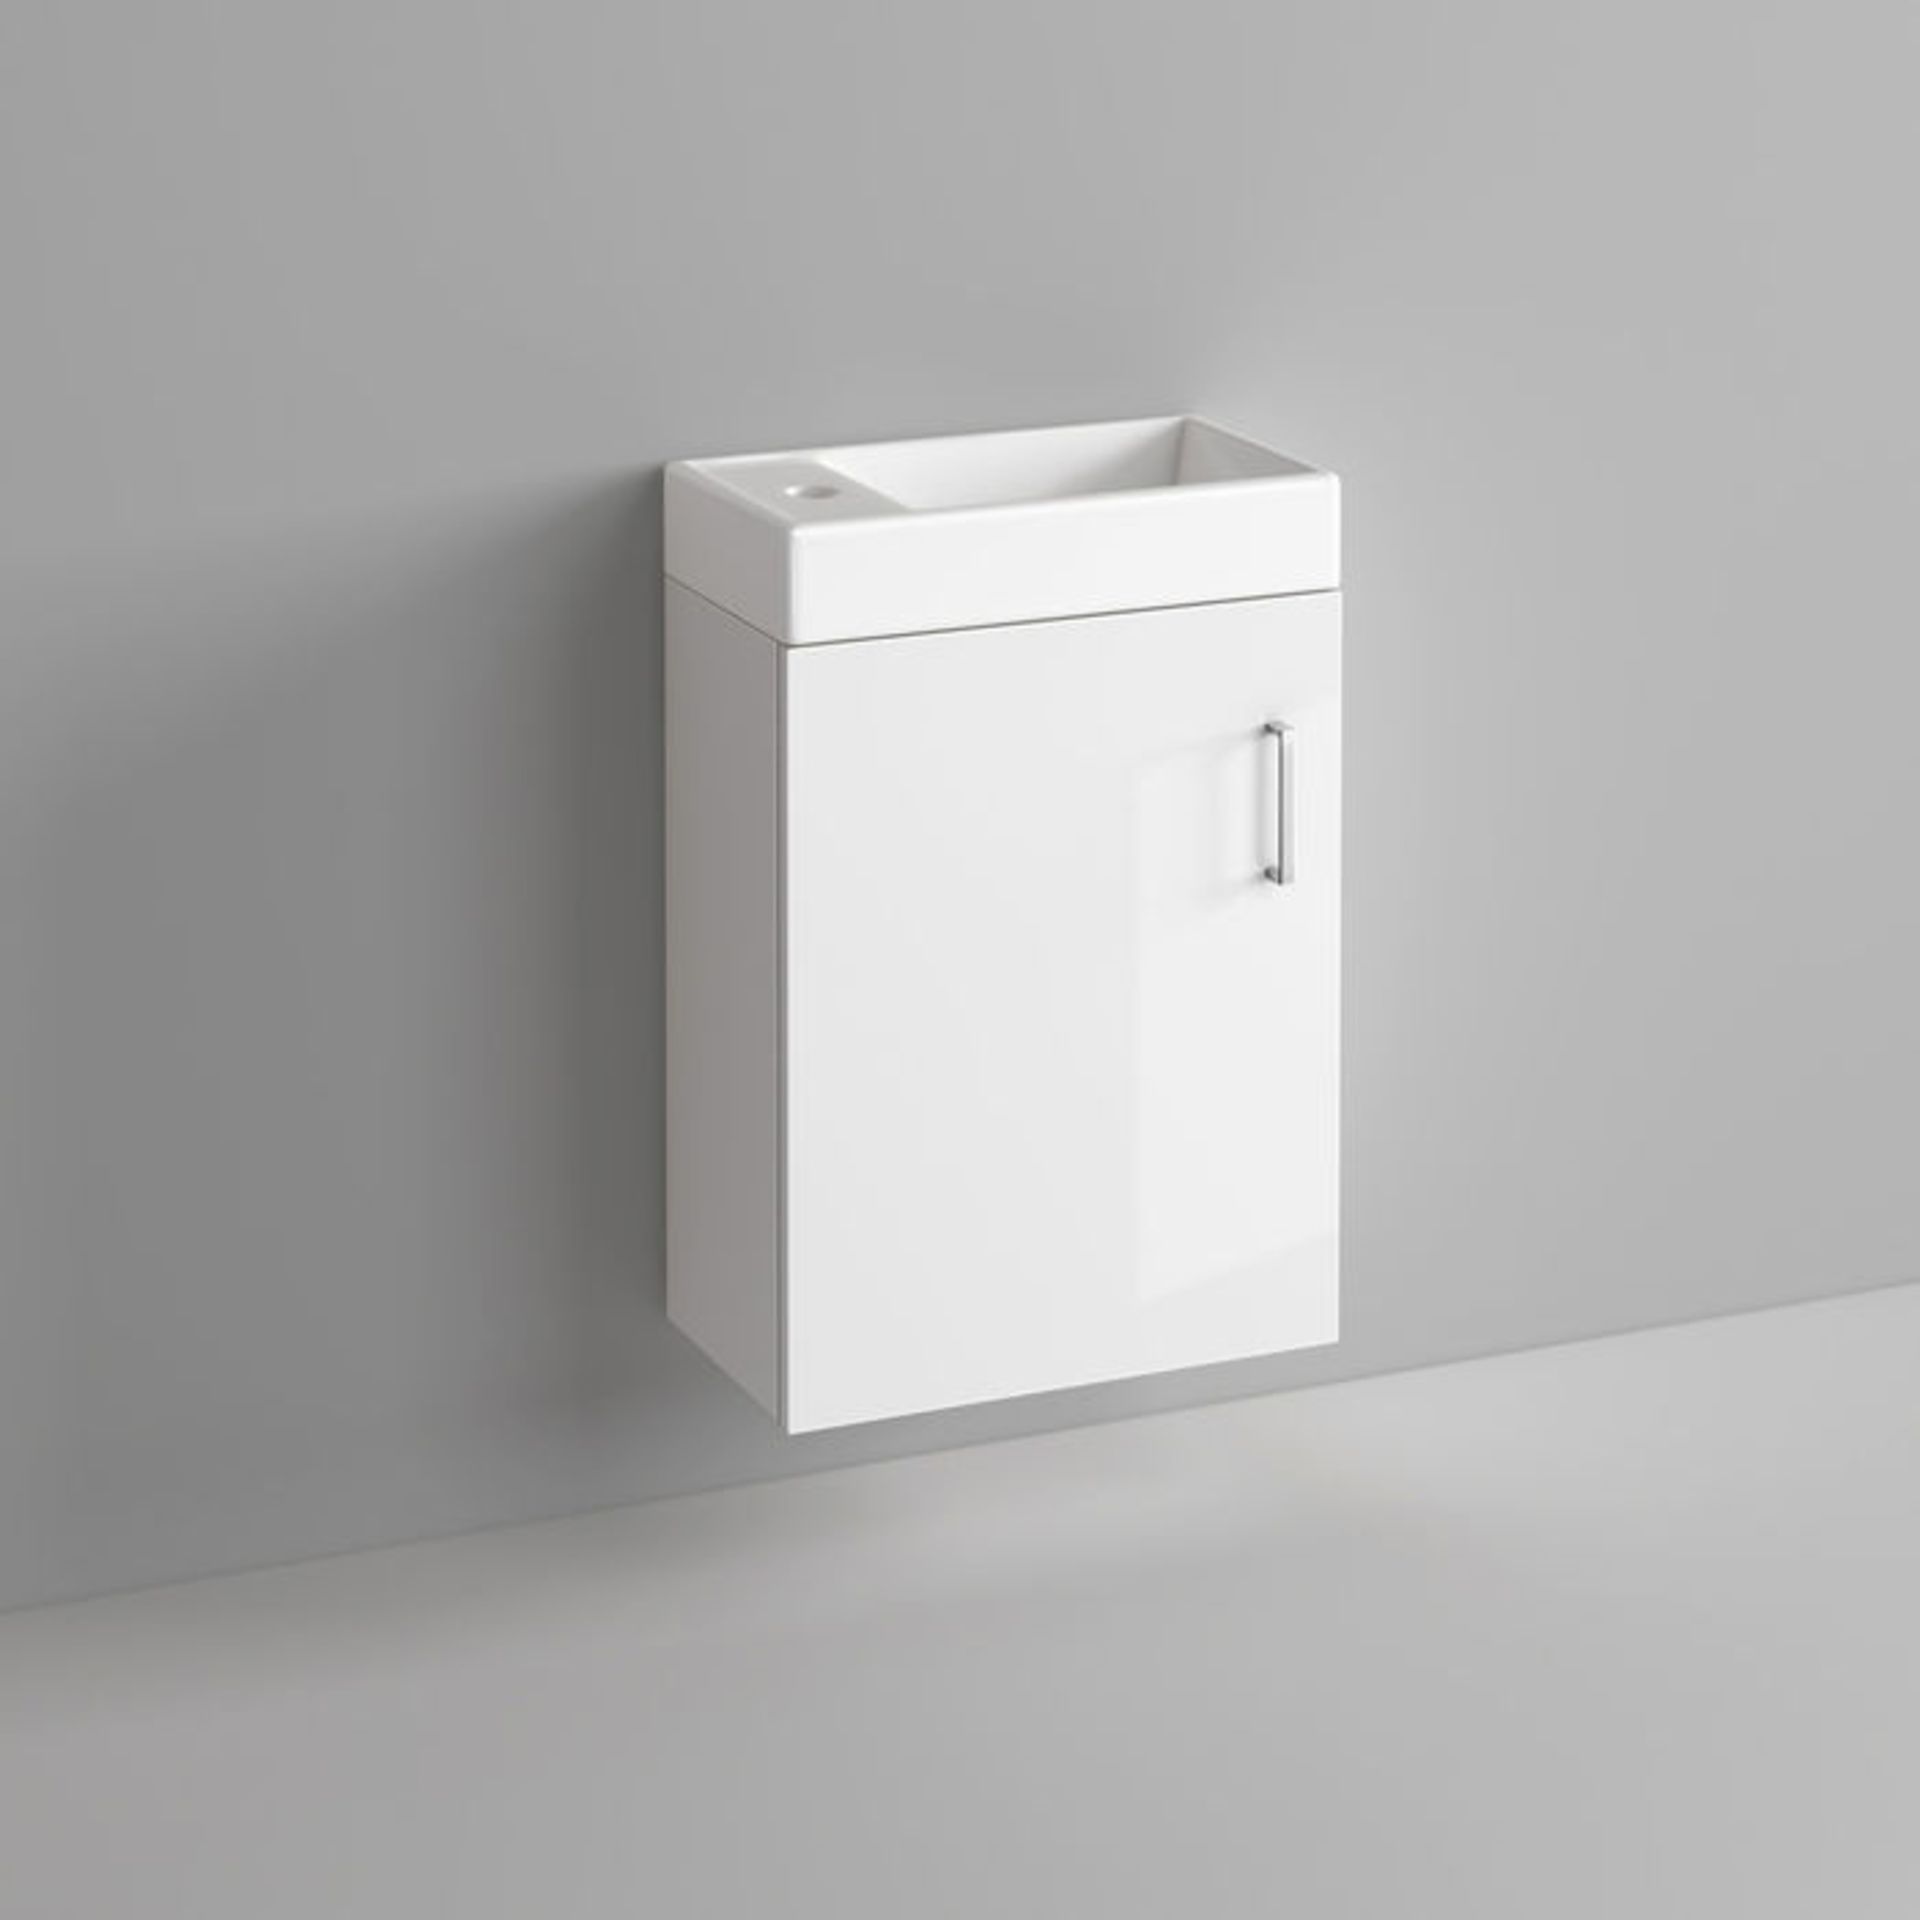 (DK42) Portland Gloss White Slimline Basin Unit - Wall Hung. Comes complete with basin. Stylish - Image 4 of 4